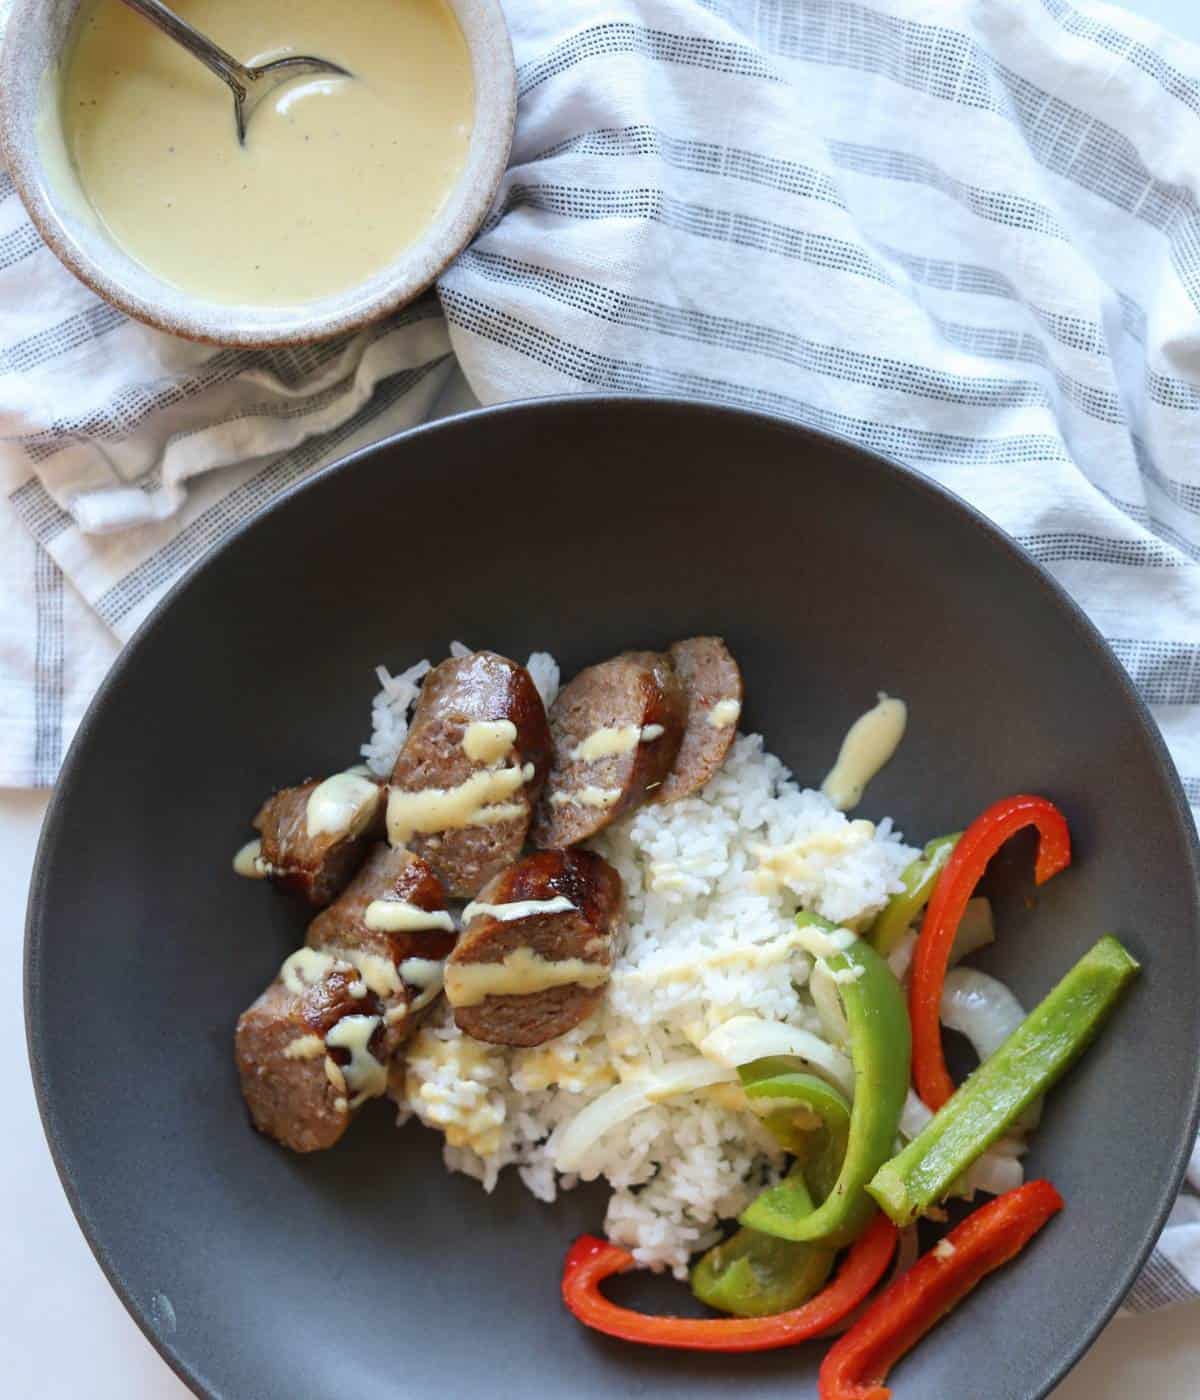 Bowl full of rice, peppers and onions and sausage with mustard aioli drizzle.